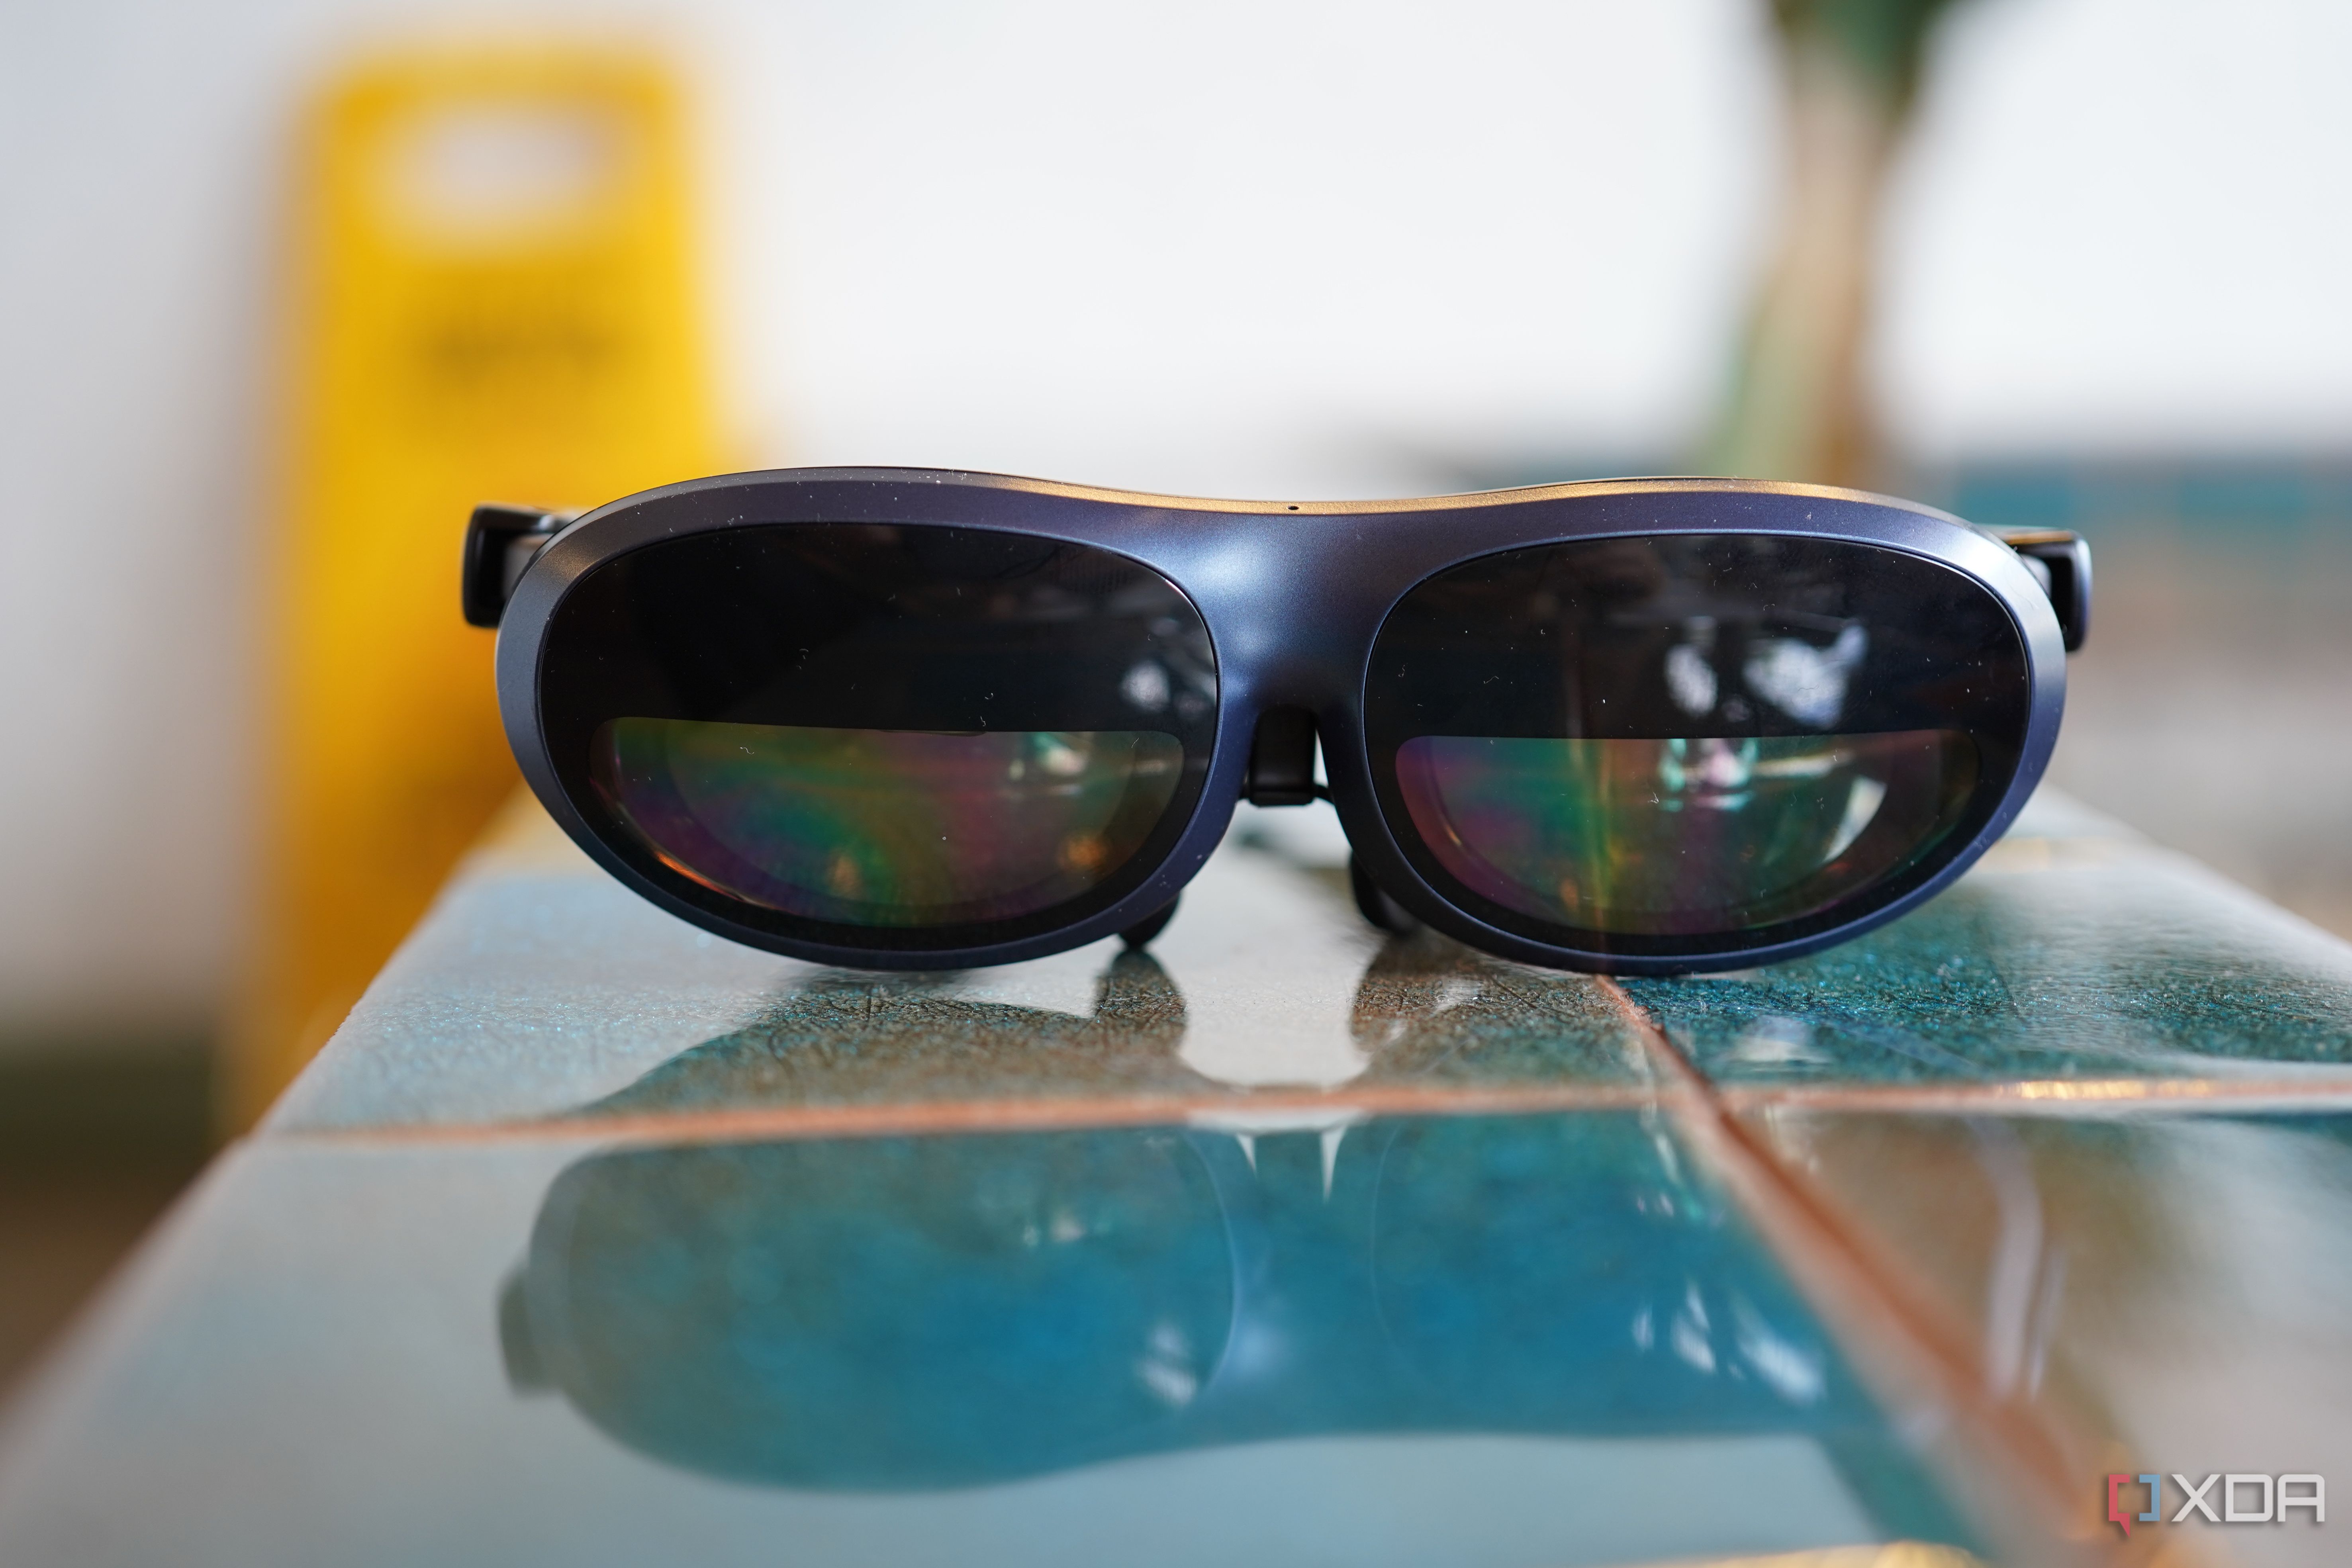 Rokid Max AR glasses on a surface. 